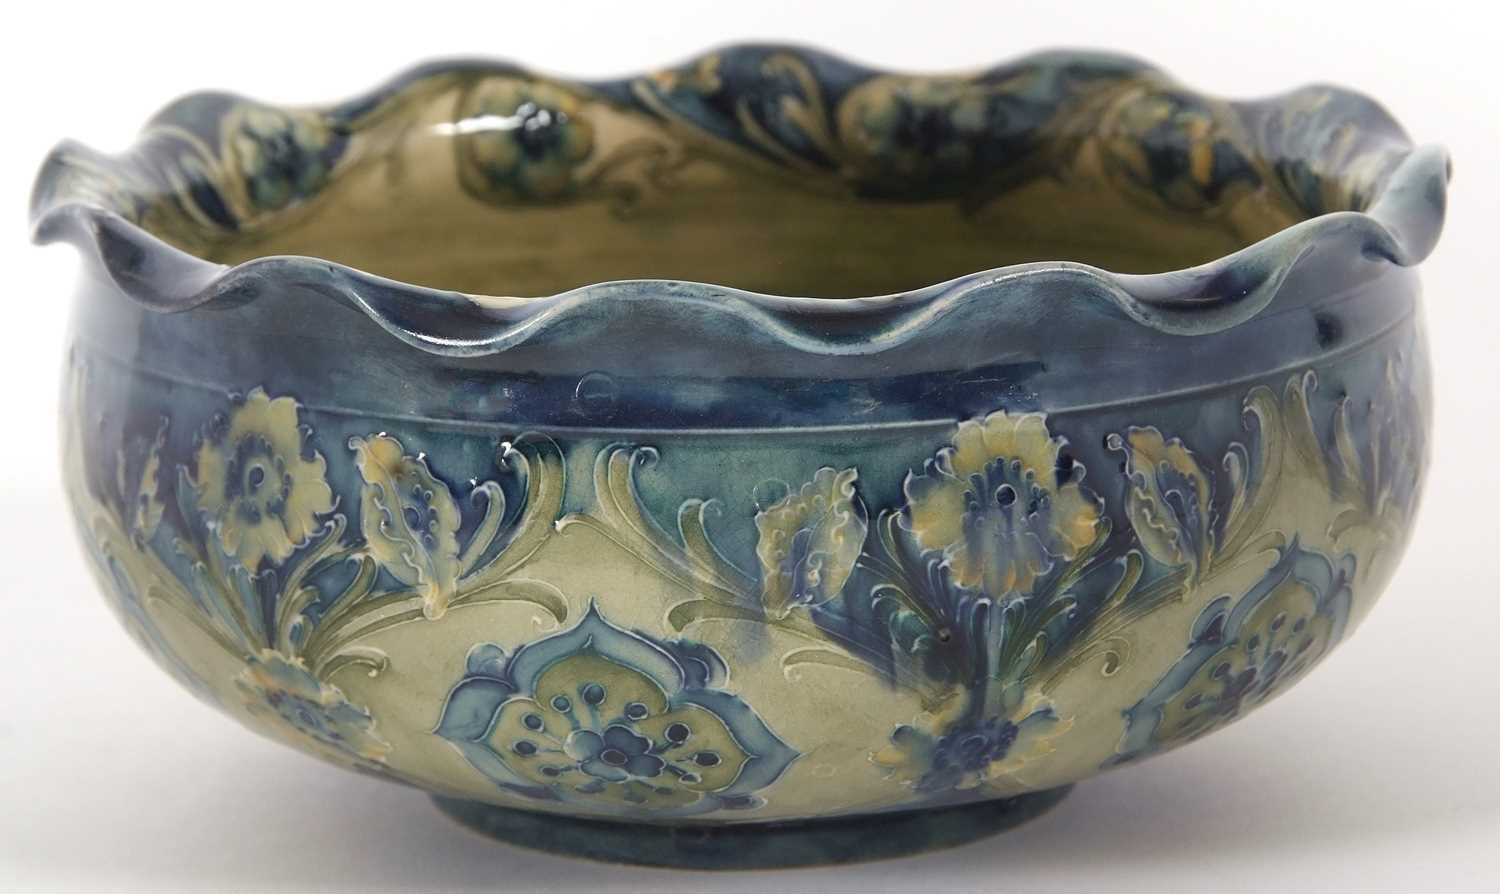 A Moorcroft Florian ware bowl made for Liberty with a Art Nouveau stylised floral design in green - Image 6 of 11